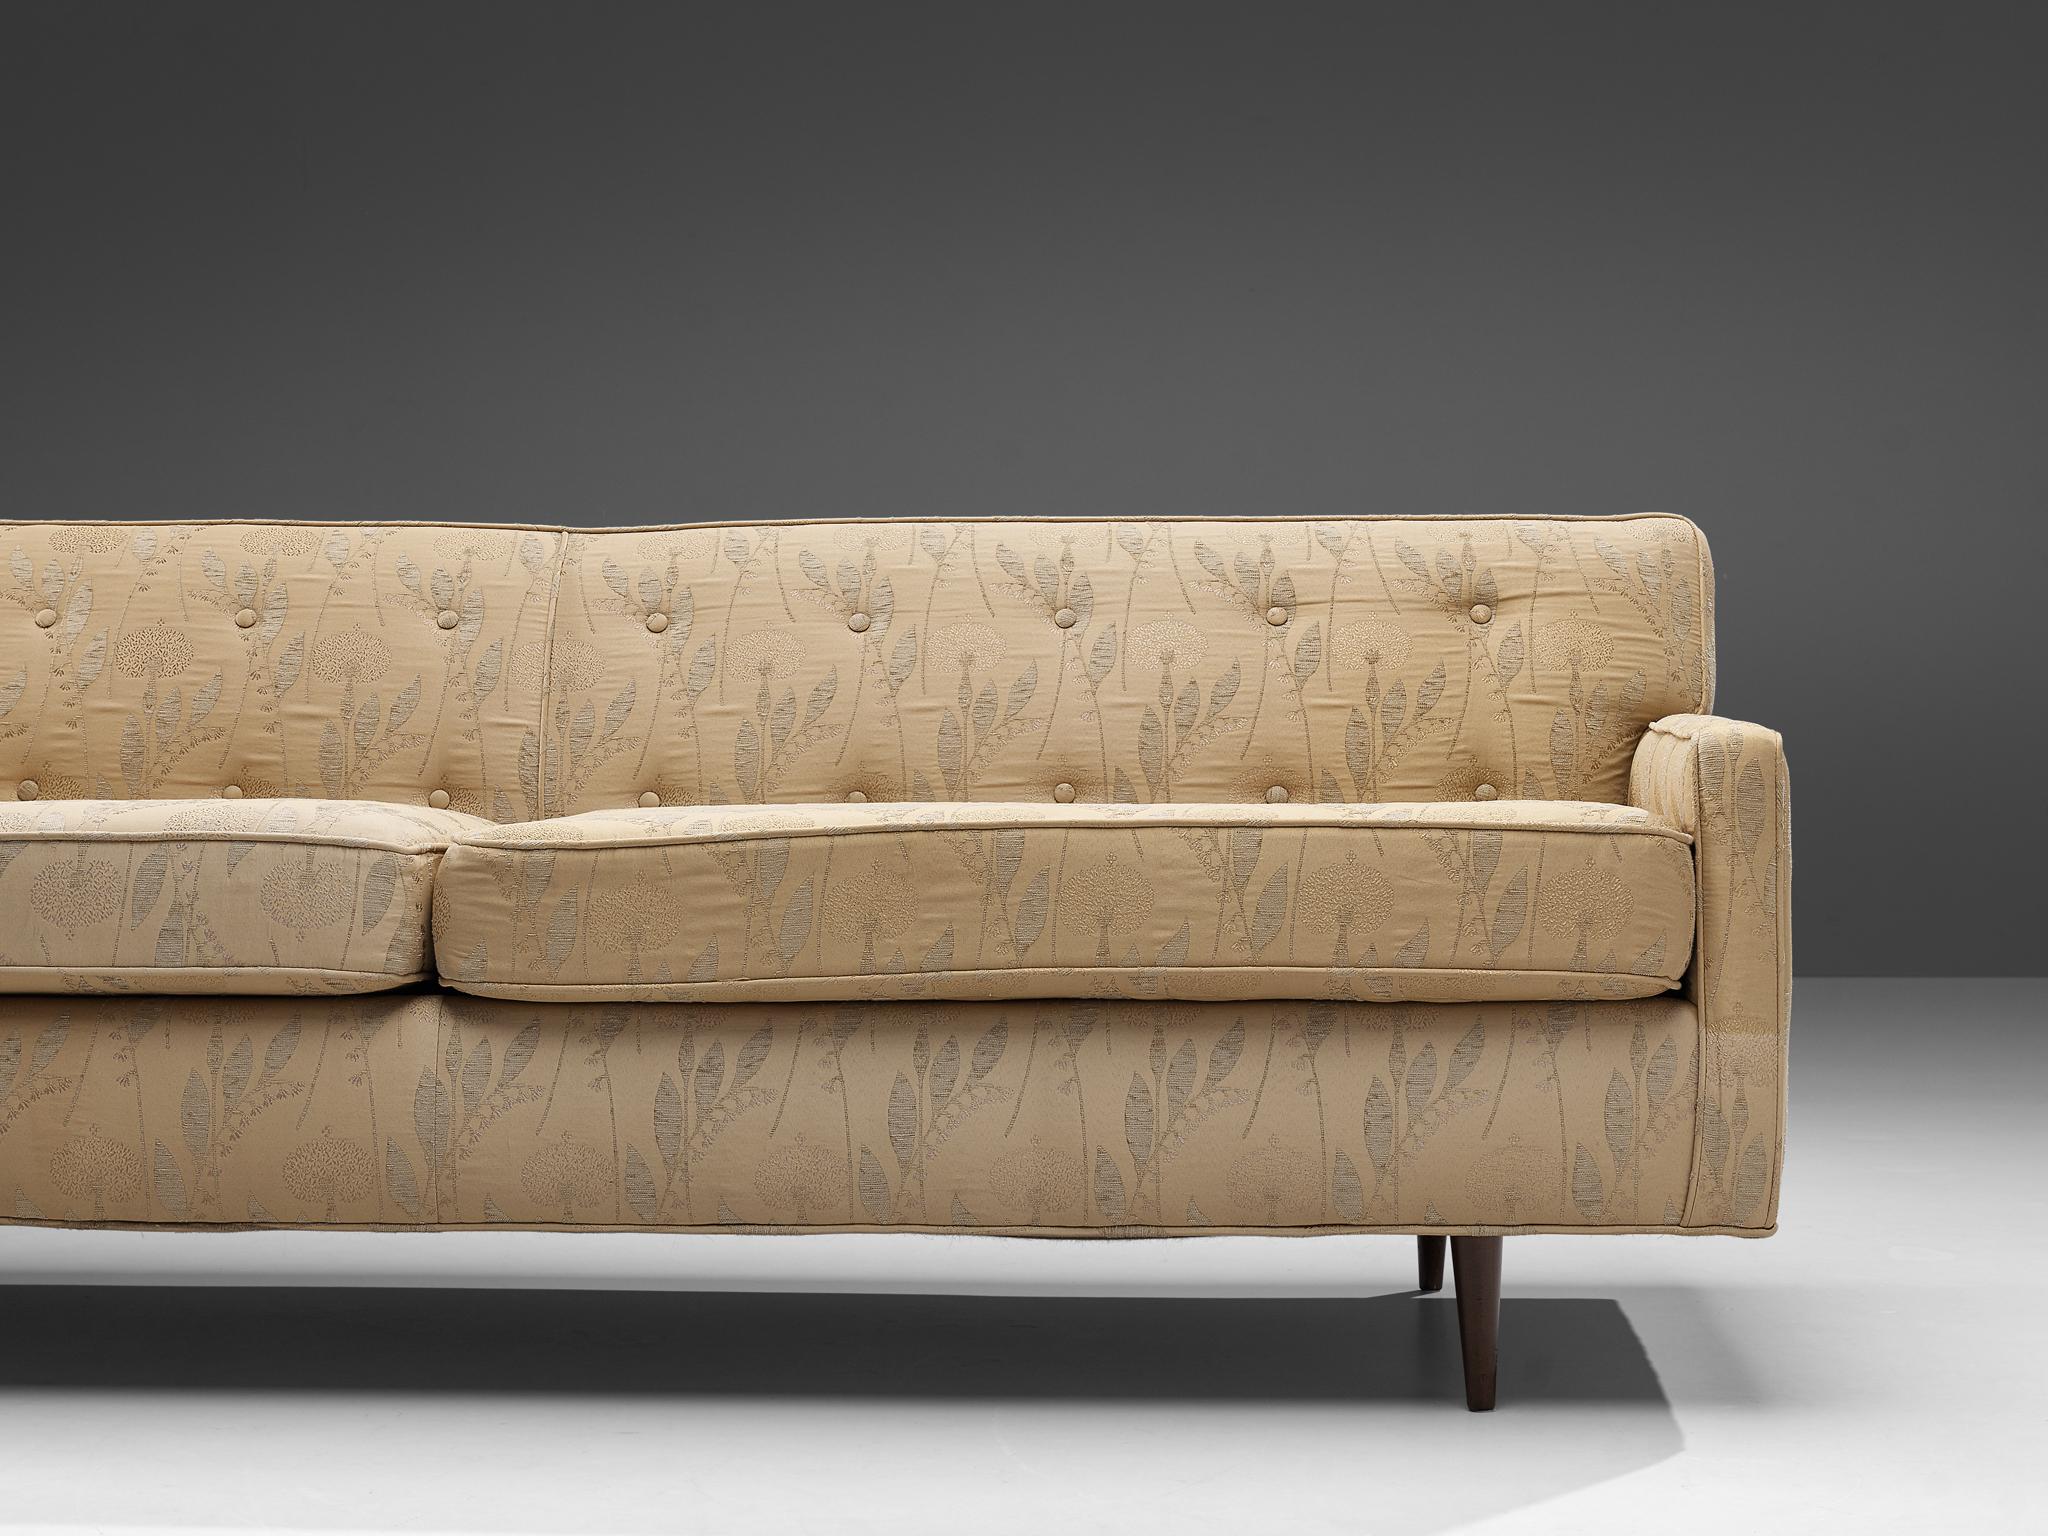 Mid-Century Modern Edward Wormley for Dunbar Sofa in Beige Upholstery with Floral Motifs For Sale